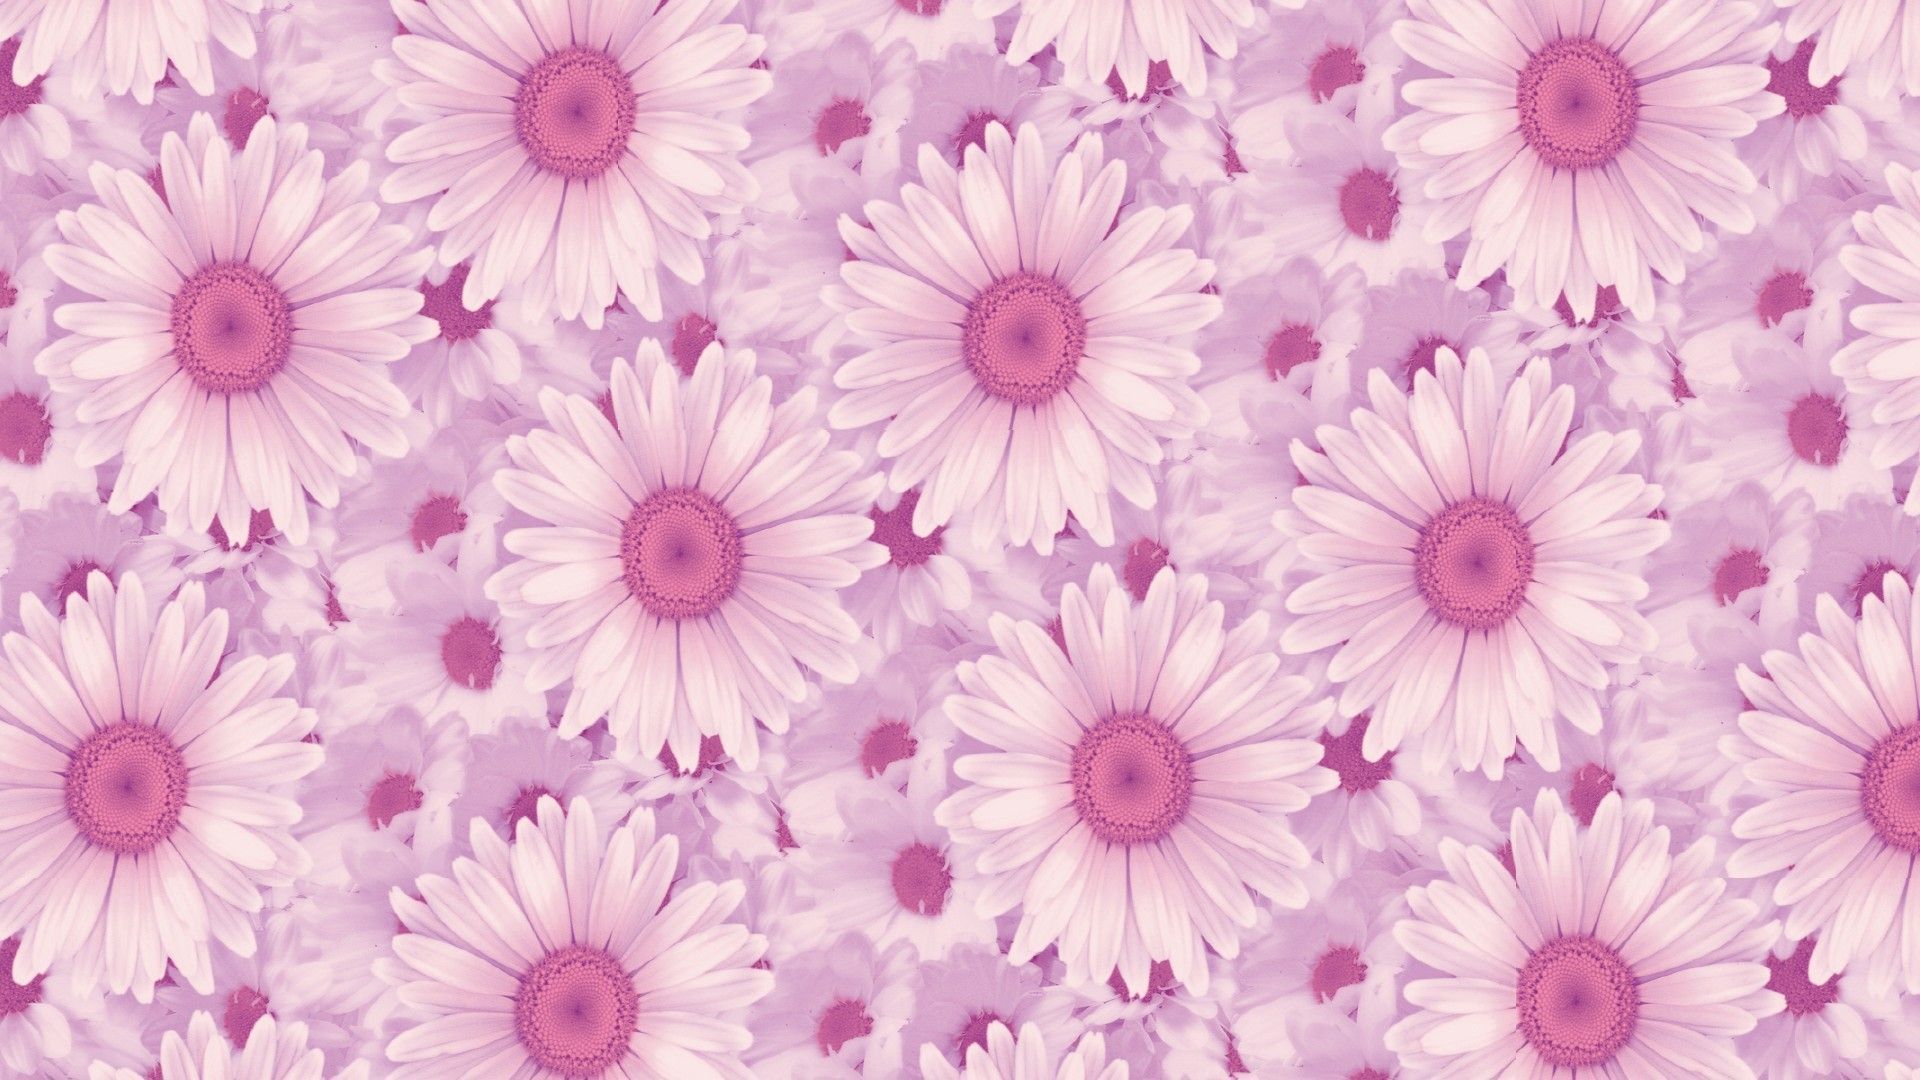 A beautiful wallpaper with a lot of pink flowers - Daisy